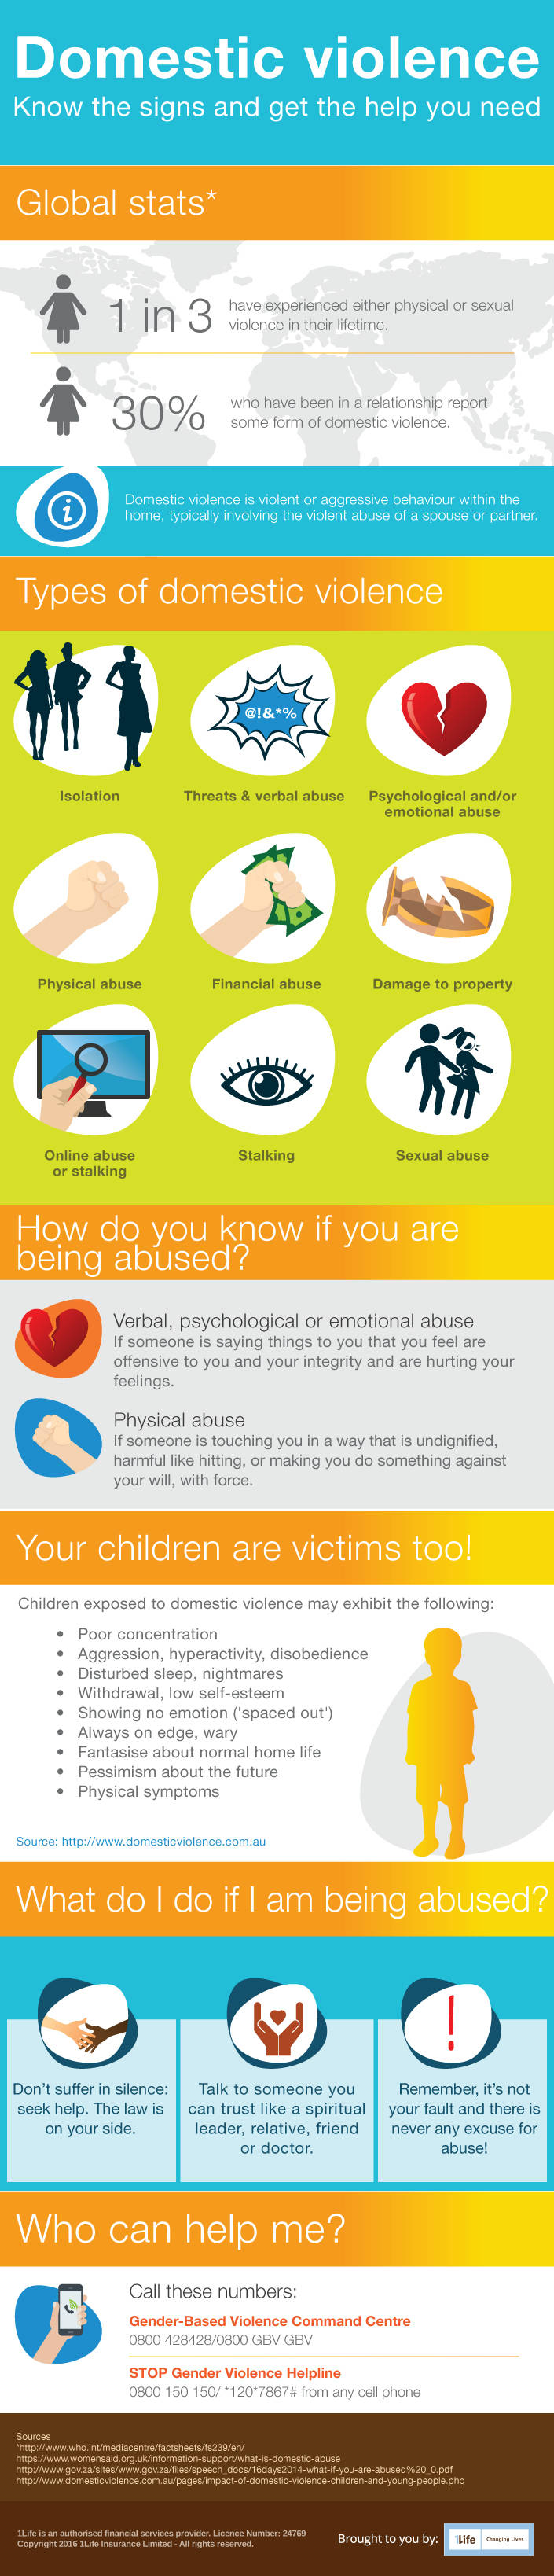 Domestic violence know the signs and get the help you need